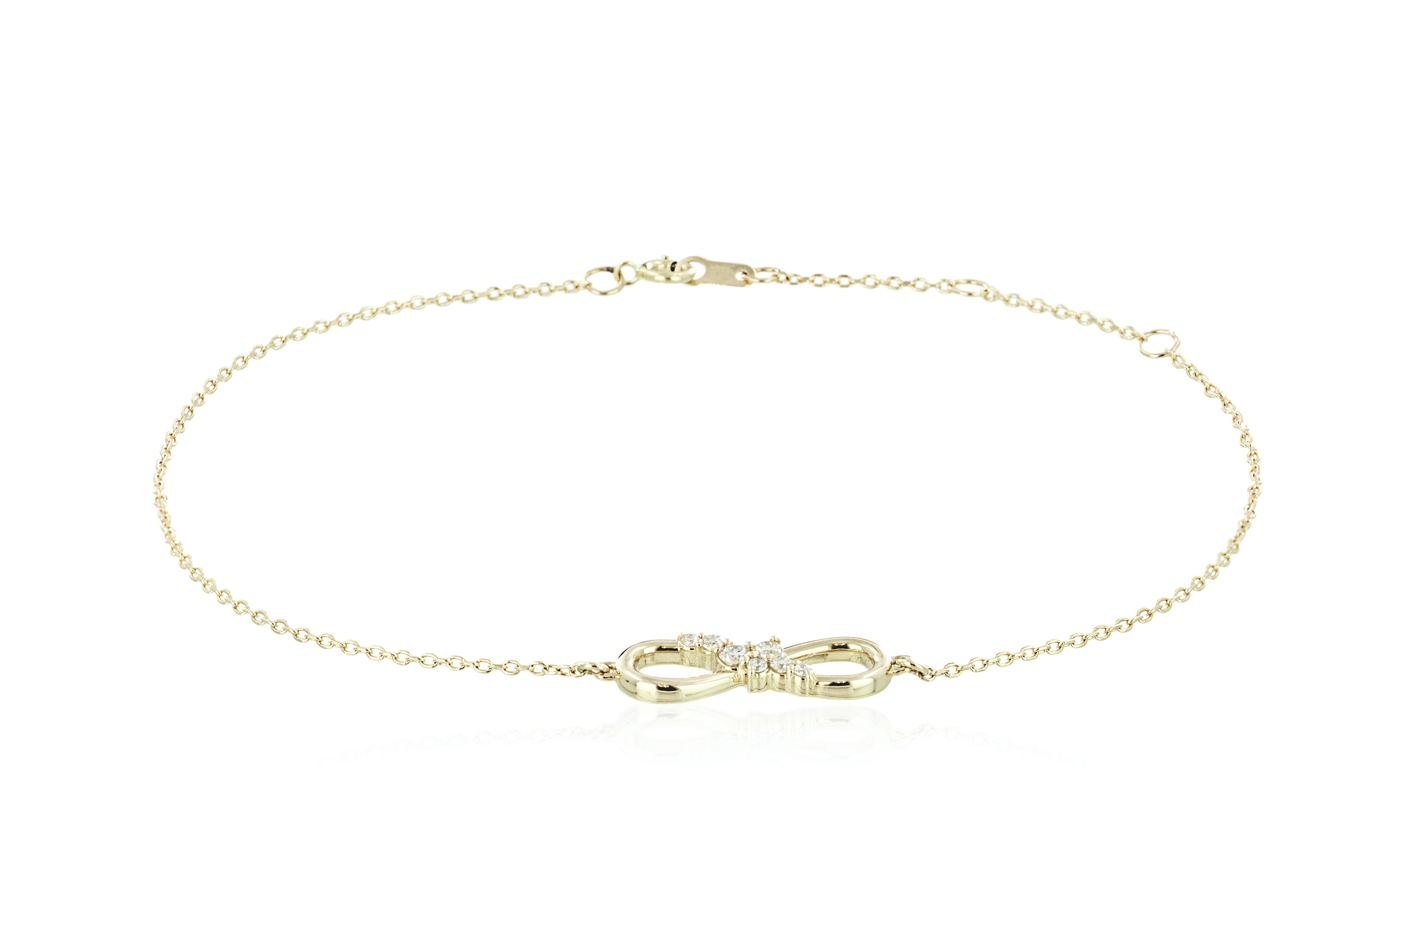 Eternity symbol bracelet with accenting lab grown diamonds in 14k yellow gold